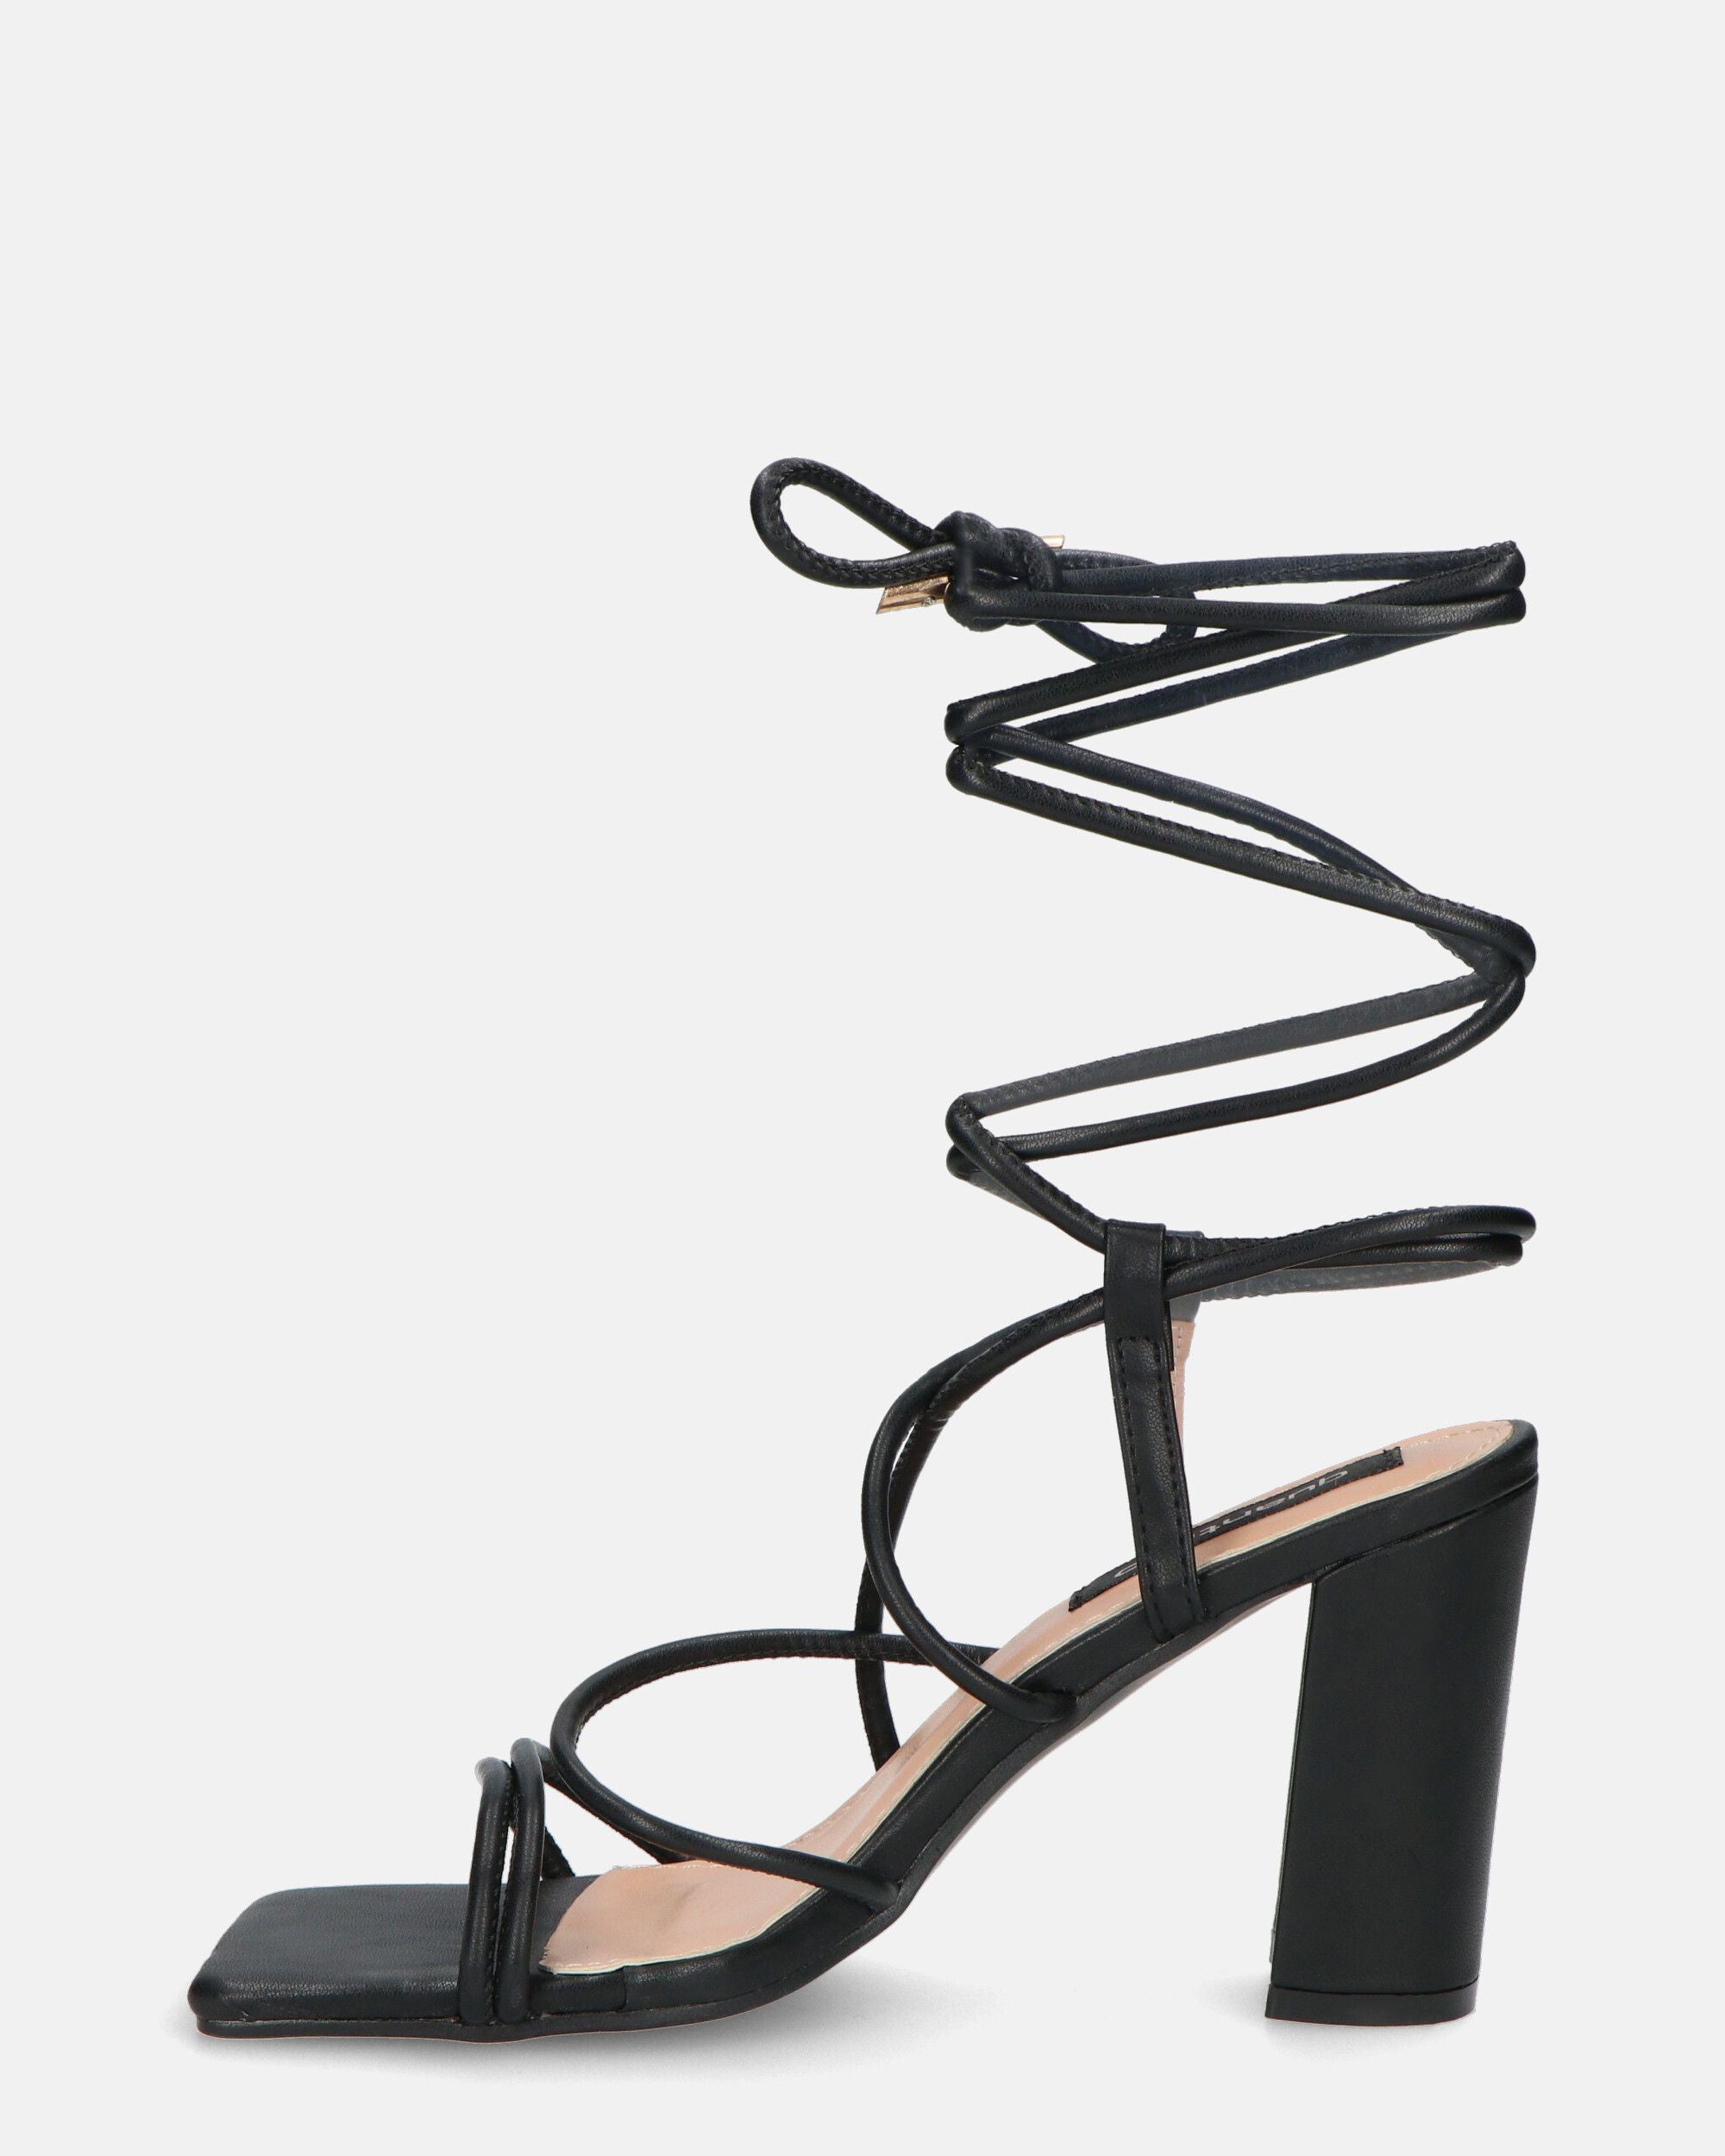 MARISOL - black heeled sandals with laces